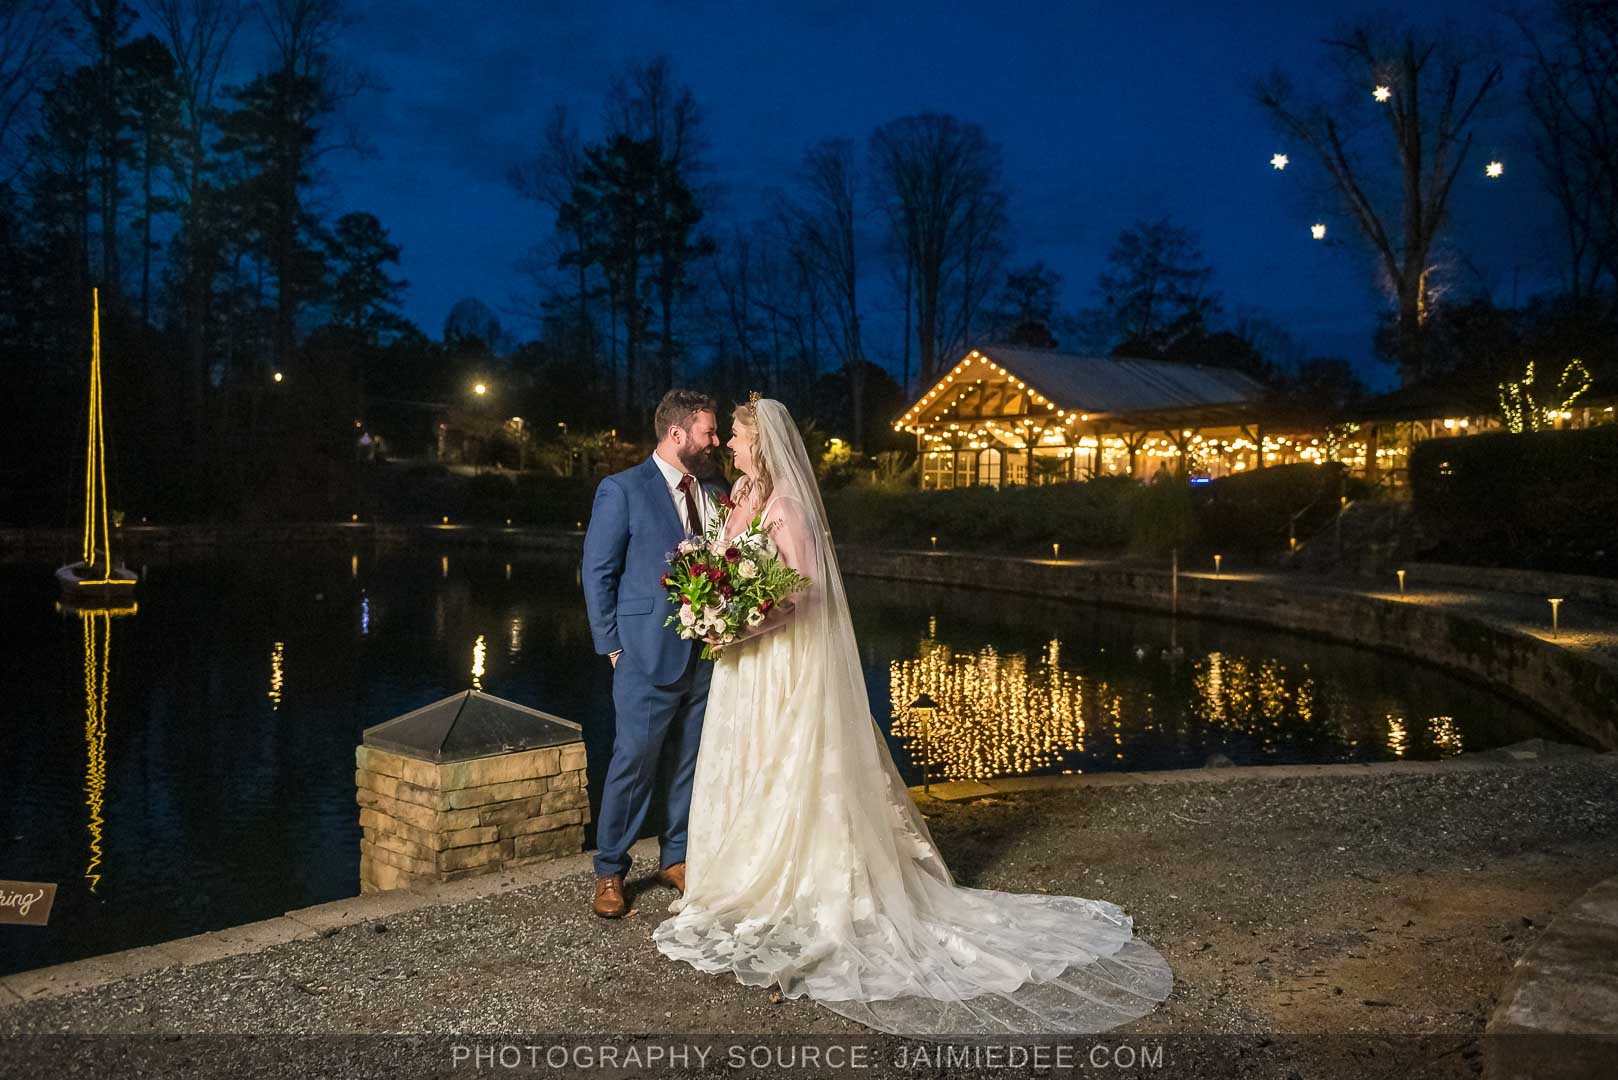 Rocky's Lake Estate Wedding Venue - bride and groom couples portrait - night time couples portraits in front of lit up venue